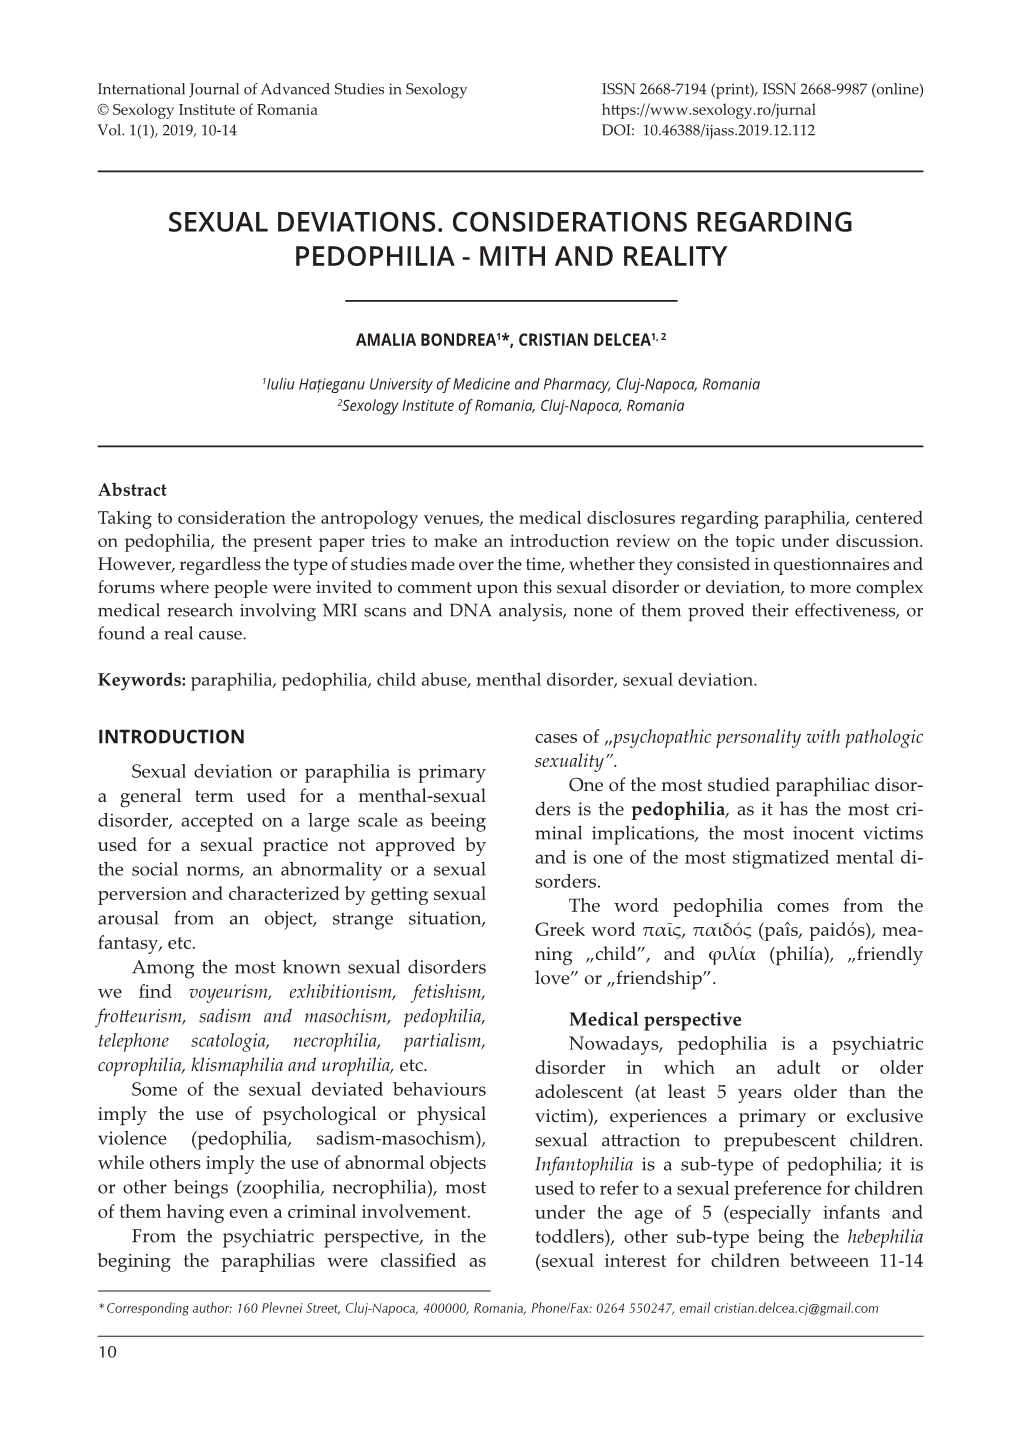 Sexual Deviations. Considerations Regarding Pedophilia - Mith and Reality